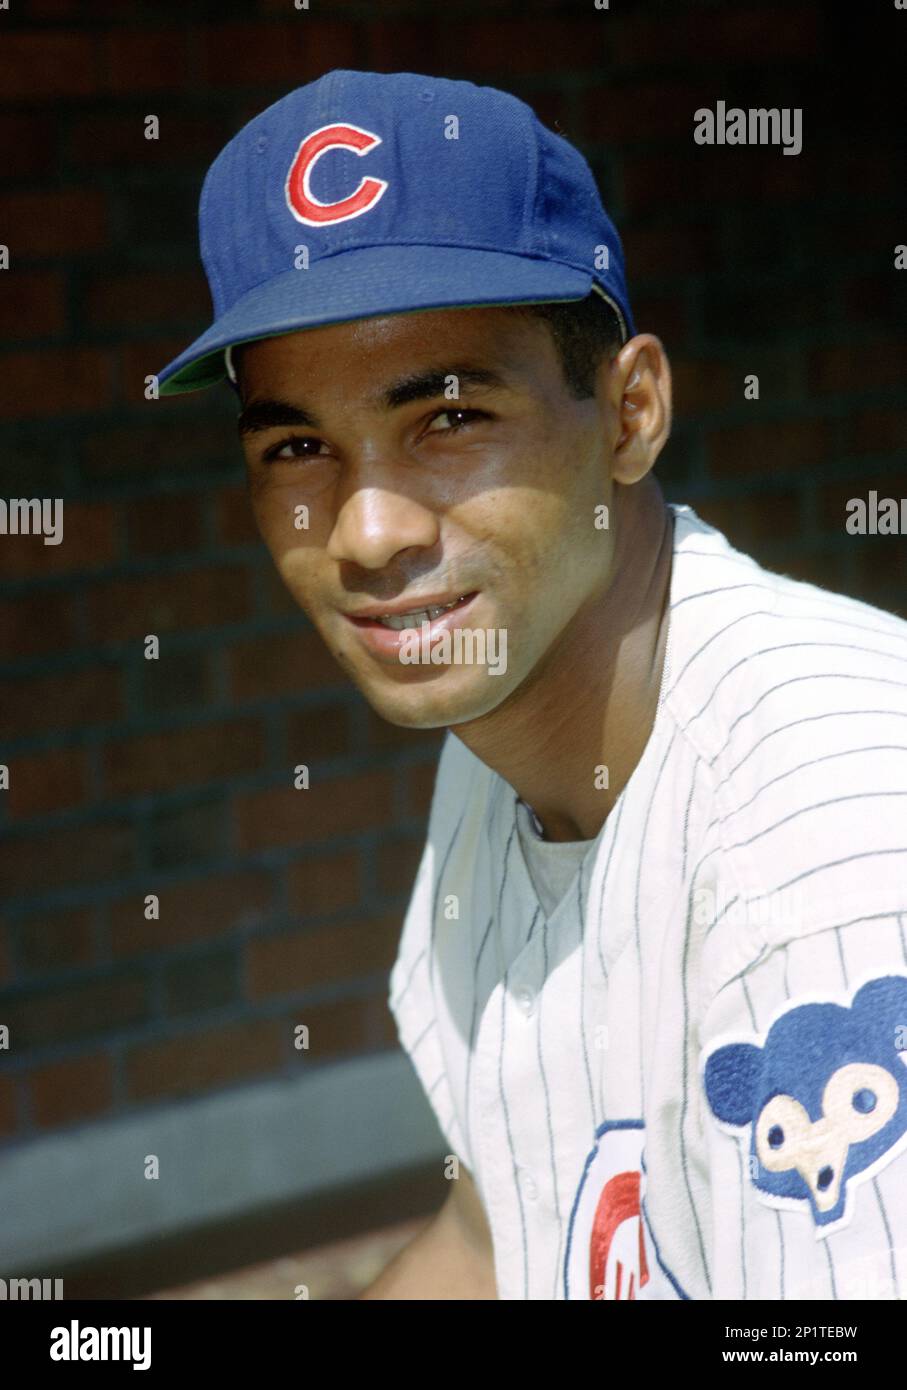 Chicago Cubs Billy Williams (26) during a game from his 1964 season against  the New York Mets at Shea Stadium in Flushing Meadows. Billy Williams  played for 18 season, with 2 different teams, was a 6-time All-Star and was  inducted to the Baseball Hall